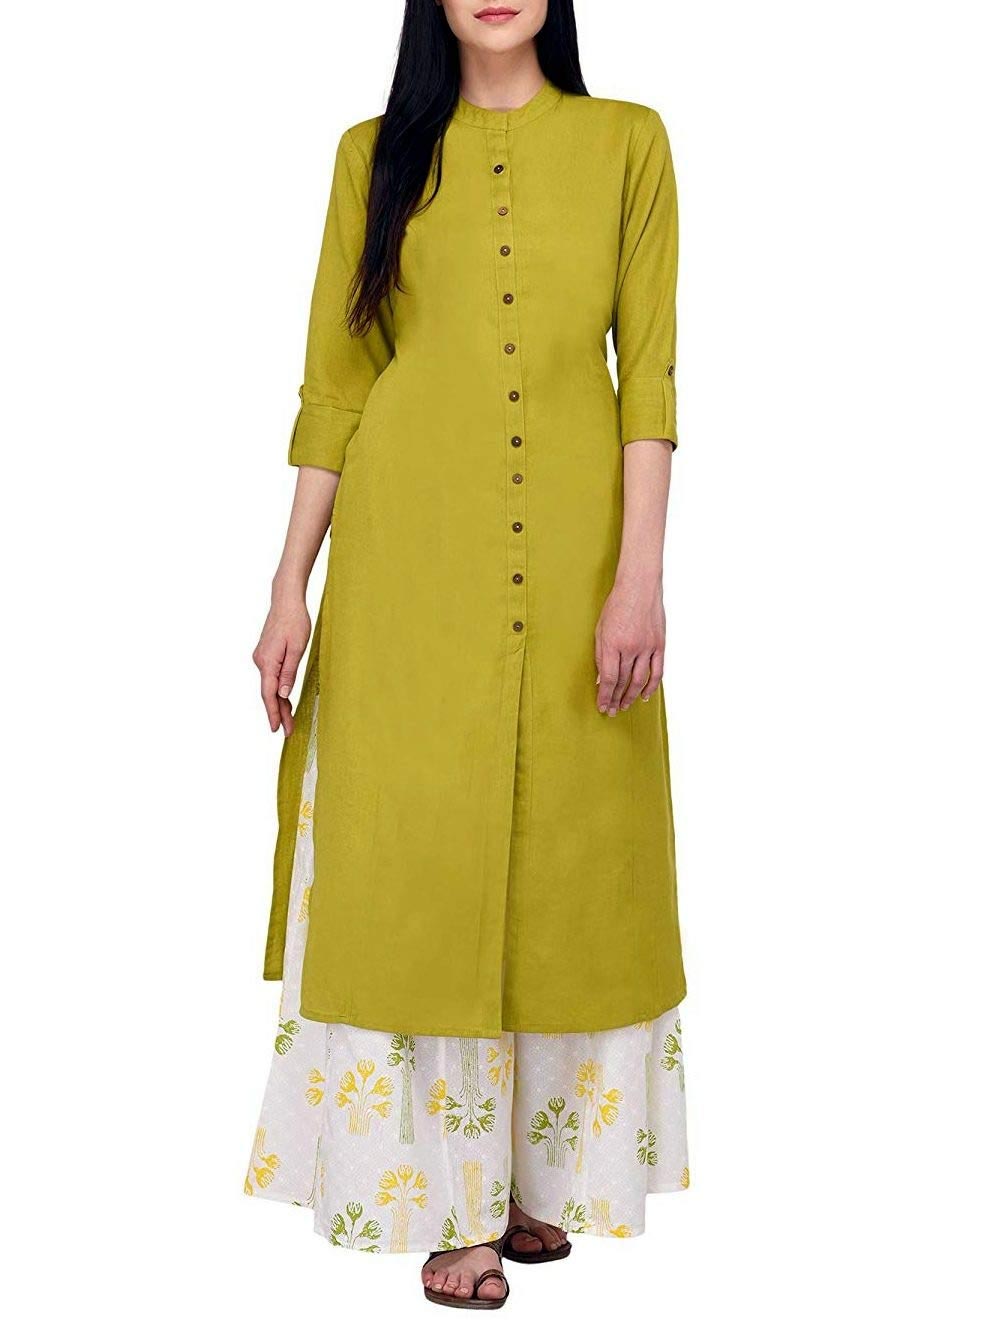 15 New sleeve designs to try with kurtis and blouse - Ethnic Fashion  Inspirations!